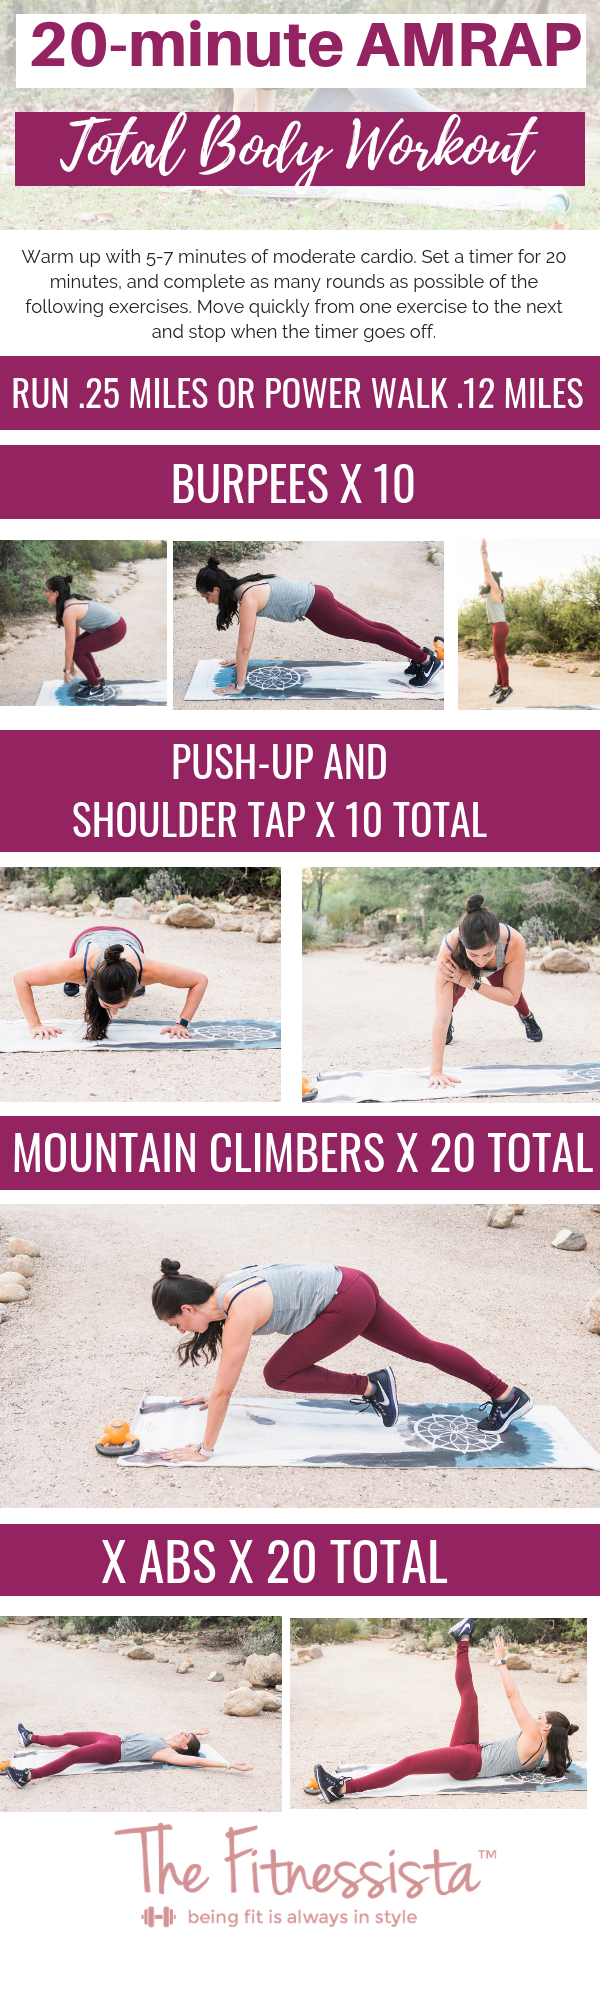 20 minute AMRAP workout you can do anywhere with your own bodyweight. All the details and form cues: fitnessista.com